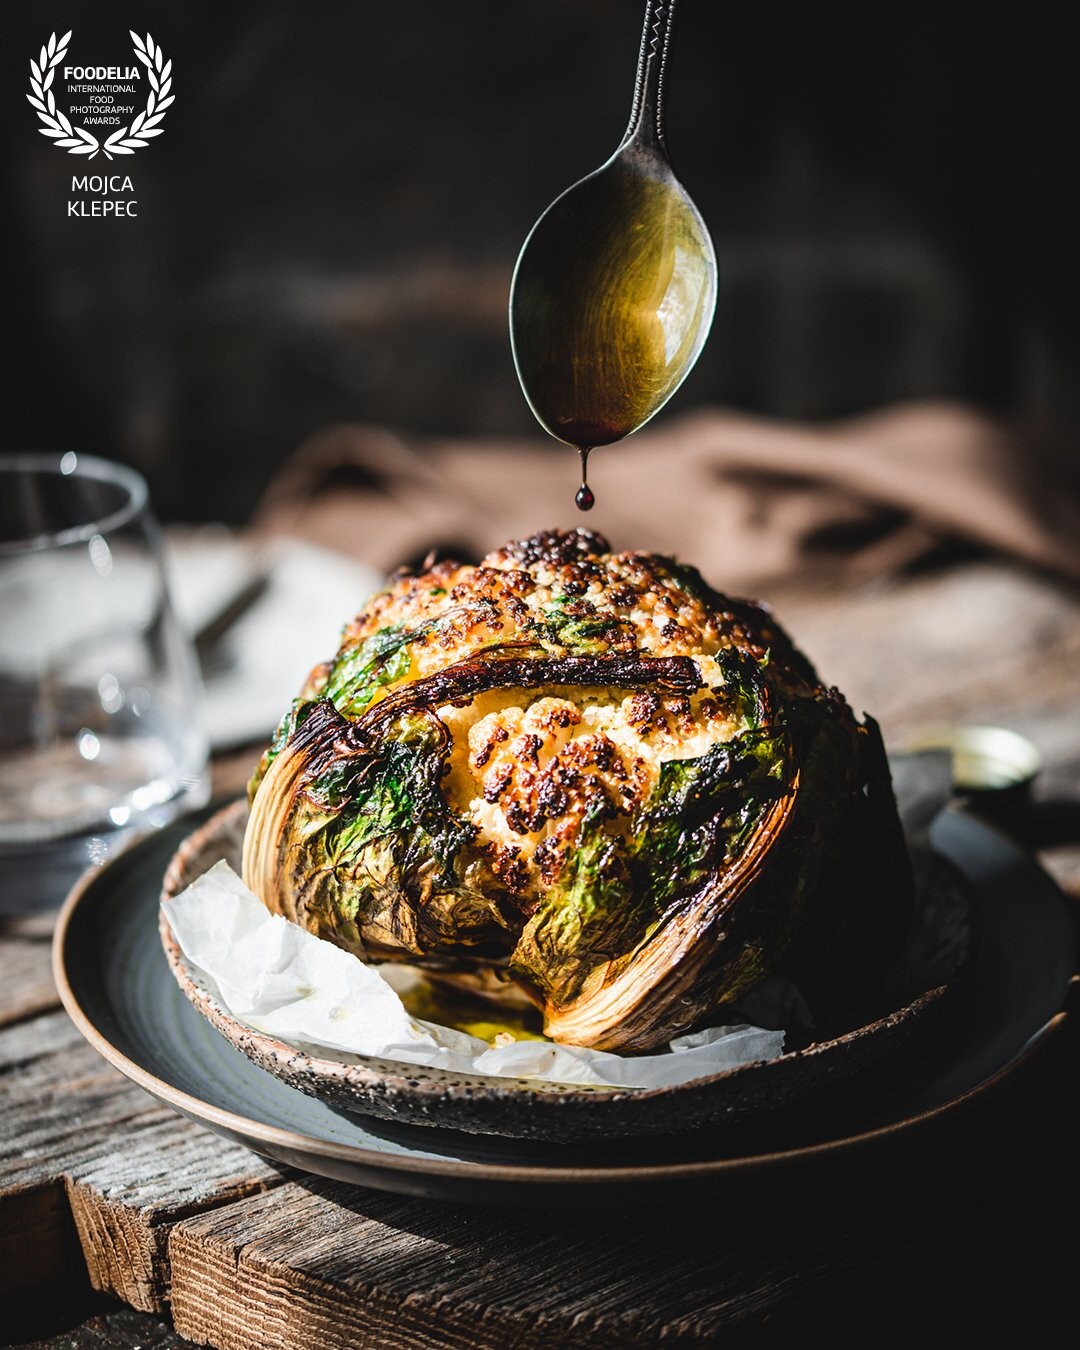 Whole roasted cauliflower served with a few drops of high quality pumpkin seed oil makes a perfect starter or main dish. <br />
Photo taken with a natural light, client work.